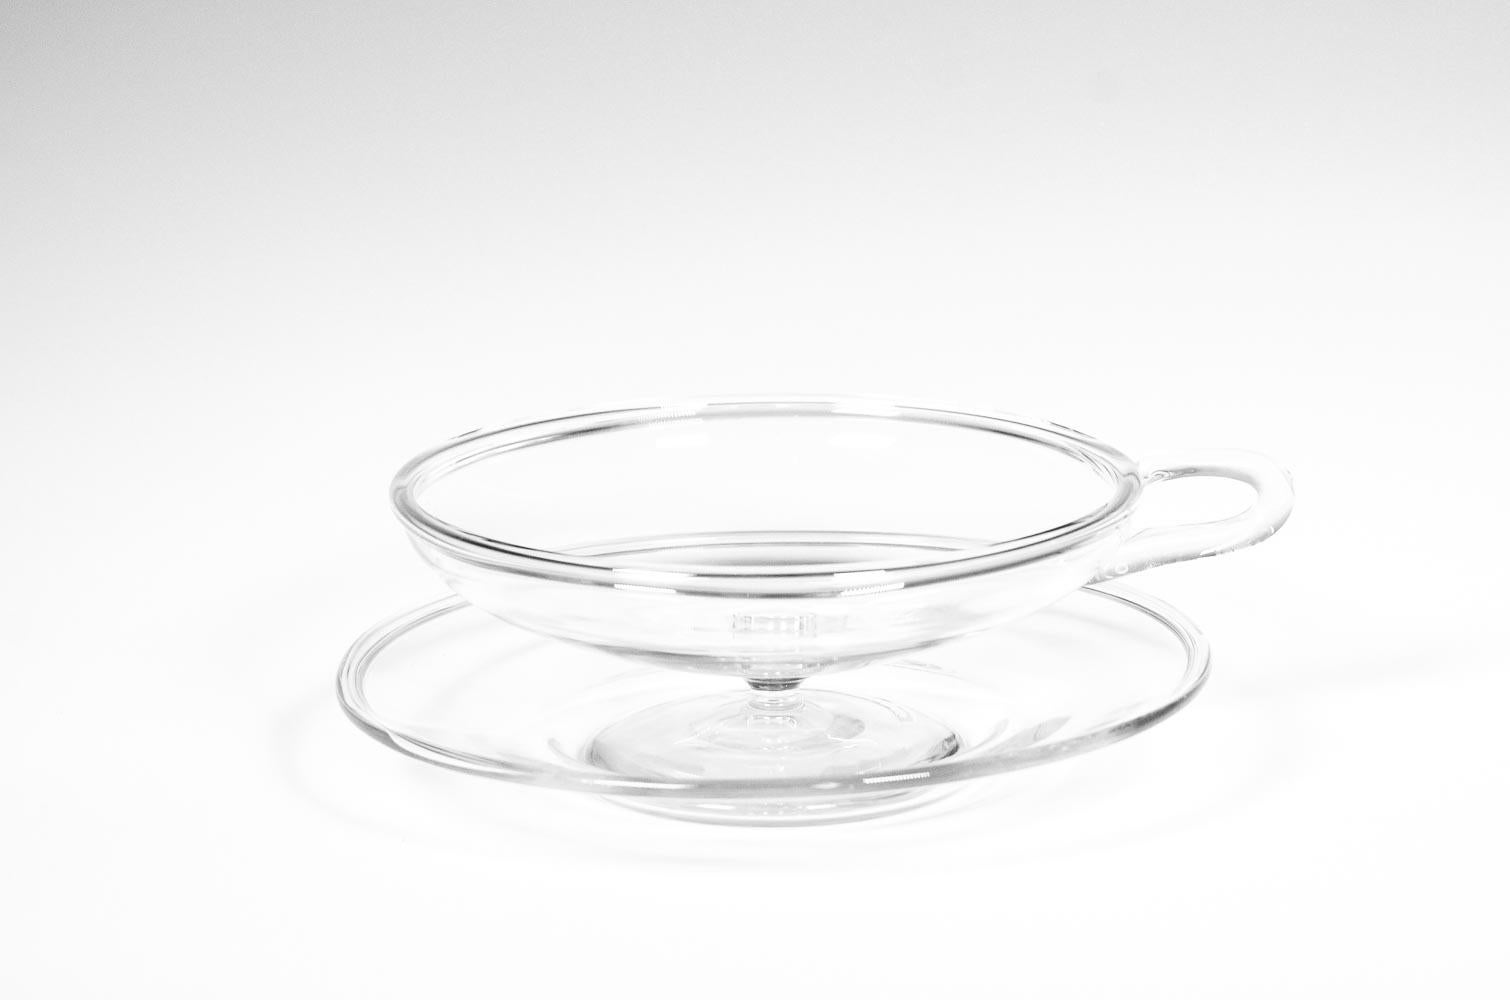 This set of 12 dessert coupes are the perfect addition to any table setting. Crafted from crystal, each coupe features a unique handle, that are embellished with a folded rim on both the bowl and plate. This timeless set can be used from first